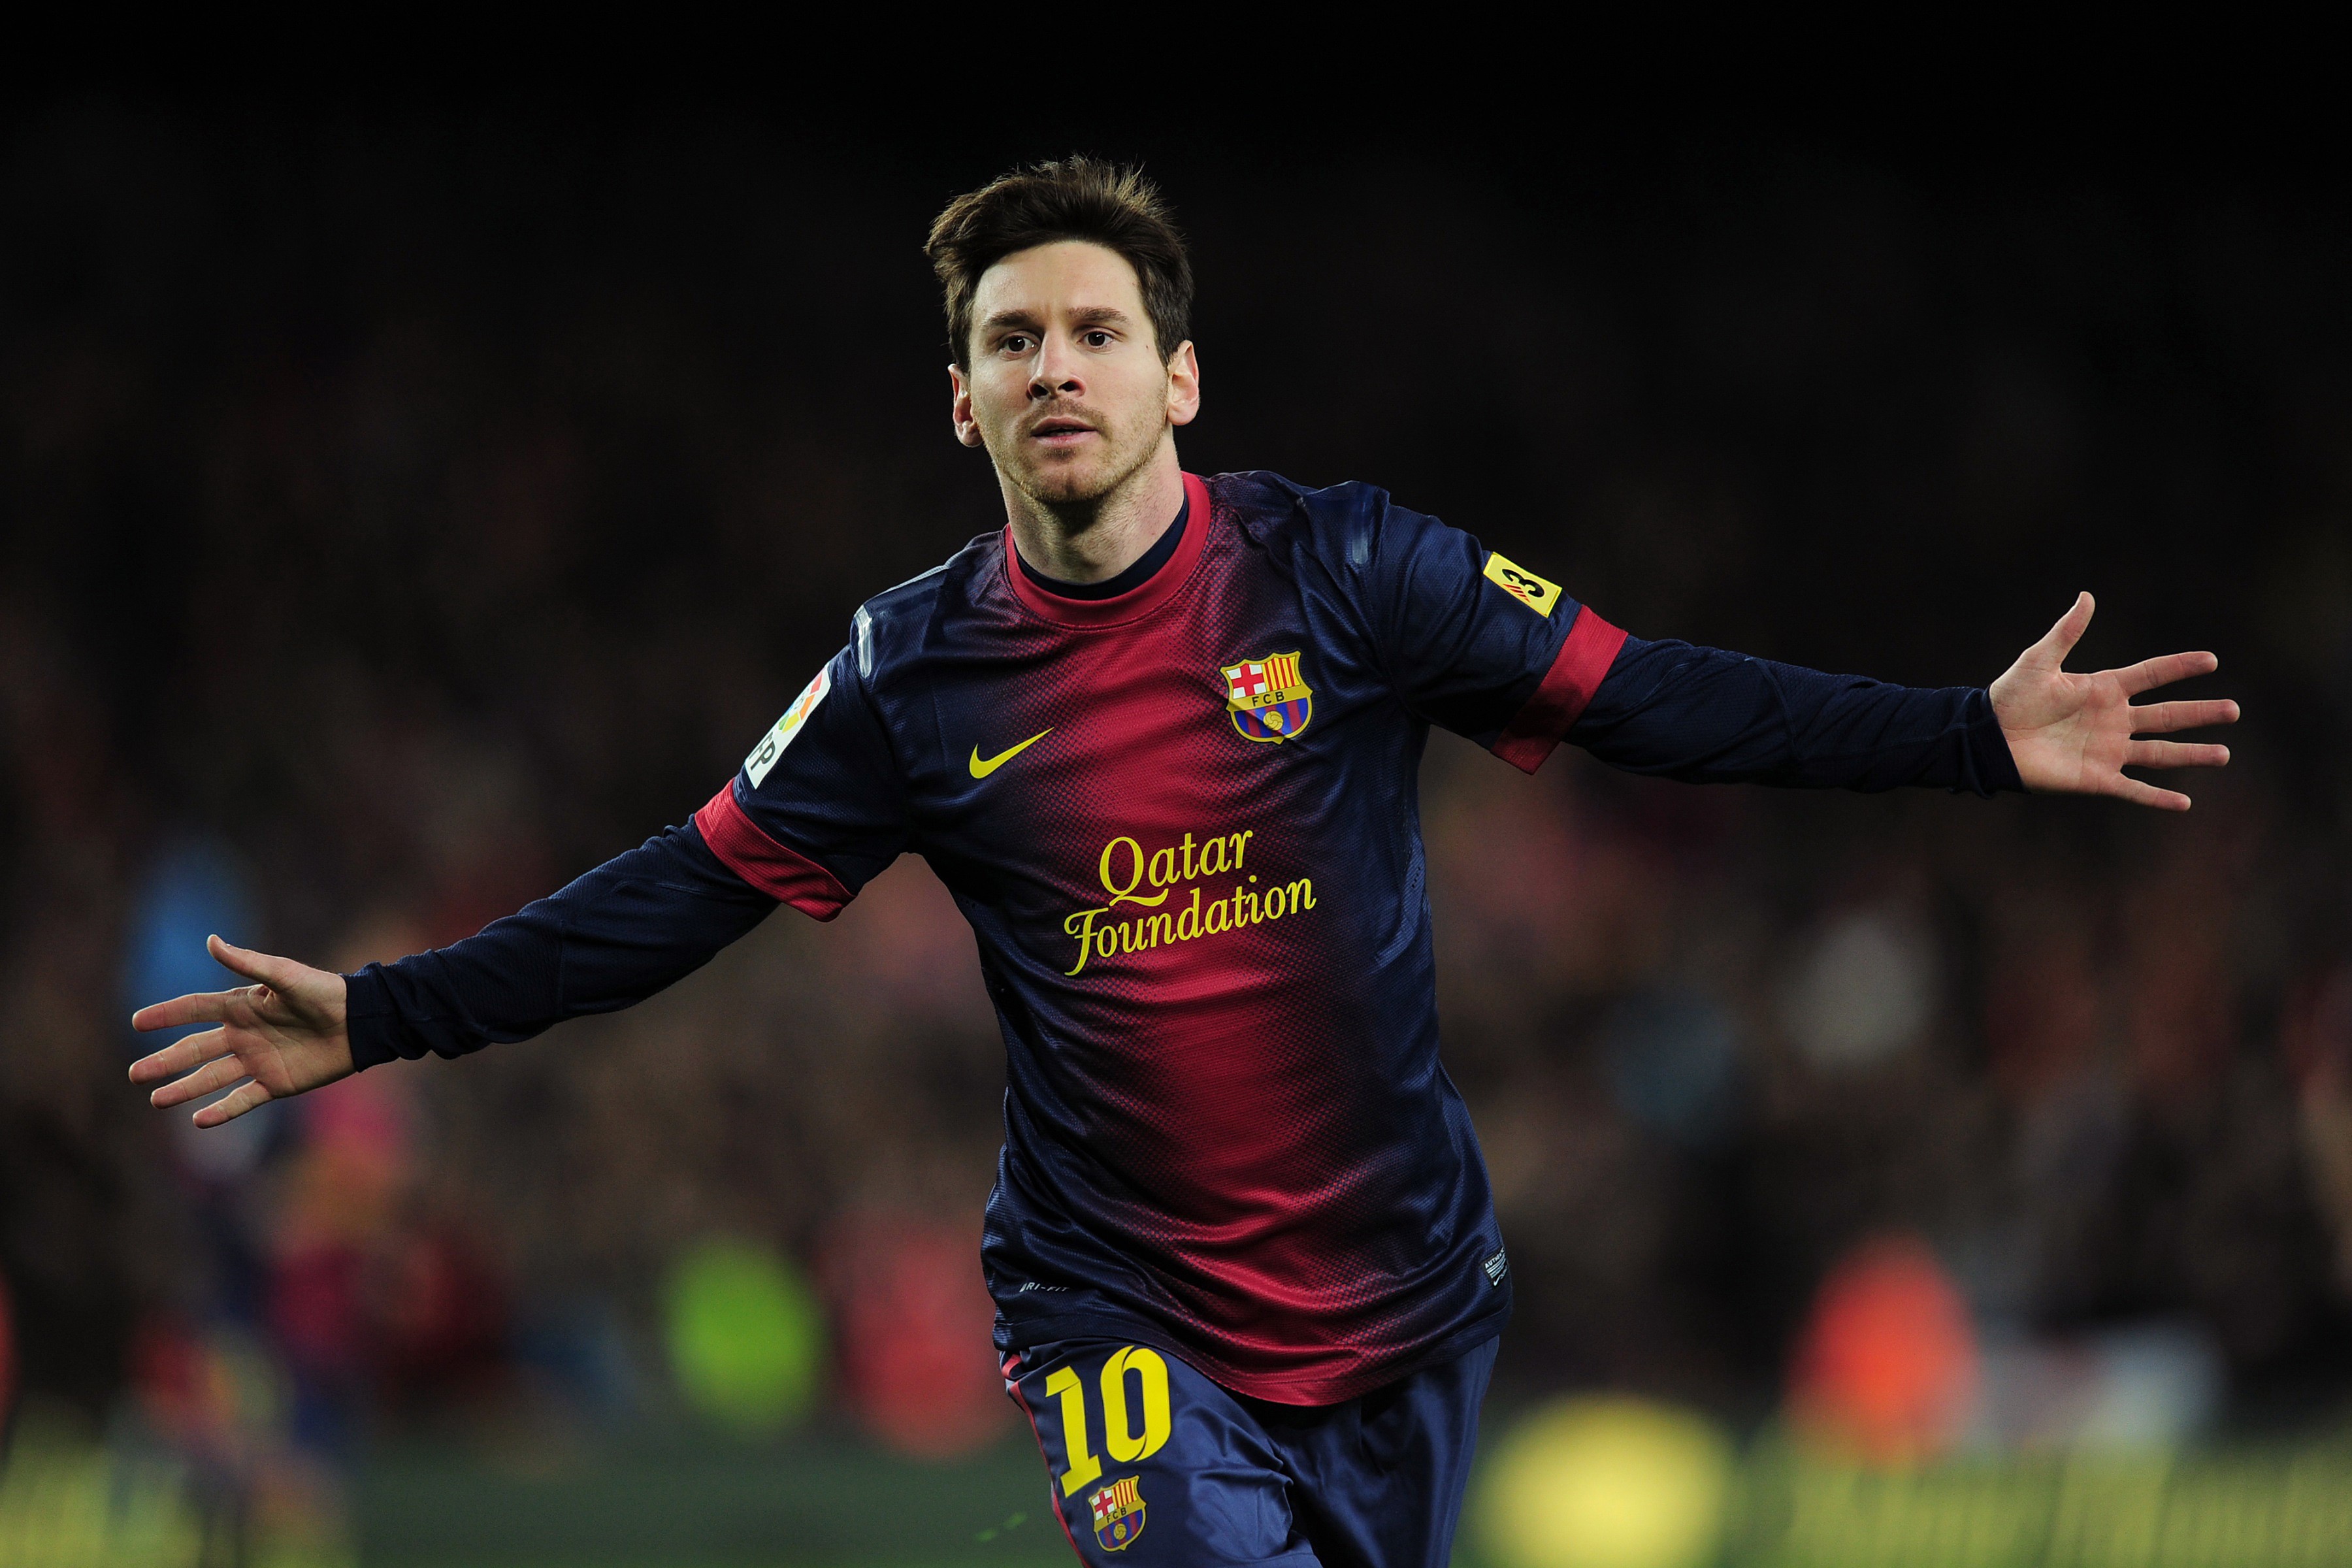 hd wallpaper of lionel messi after a goal